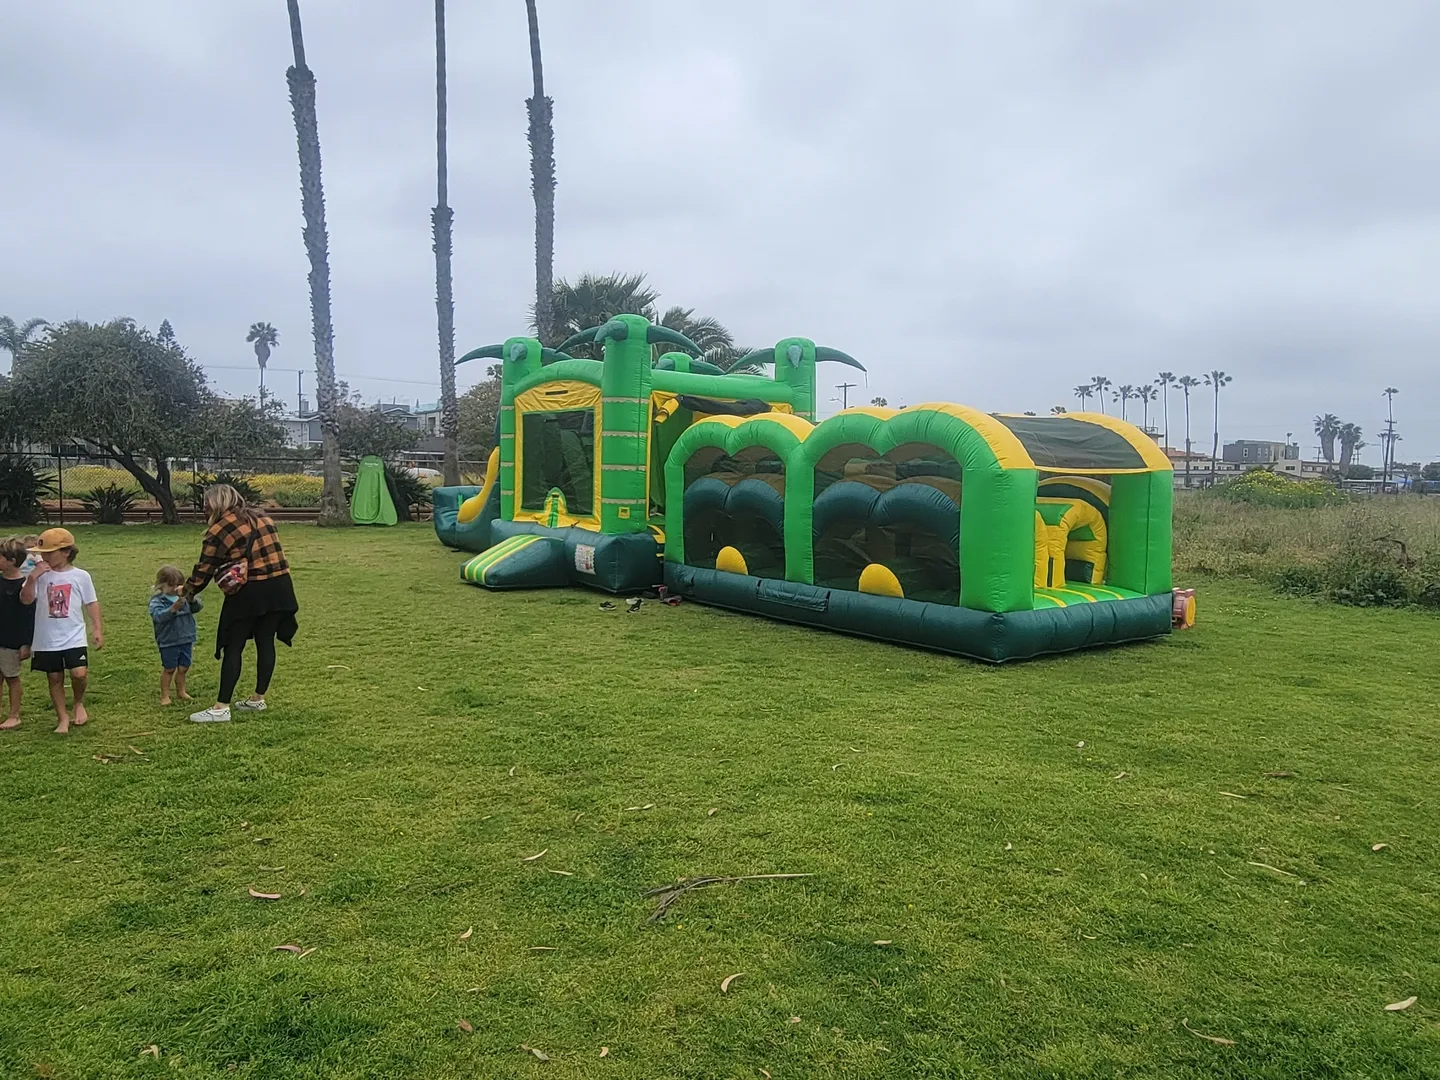 A man and woman playing in front of an inflatable obstacle course.